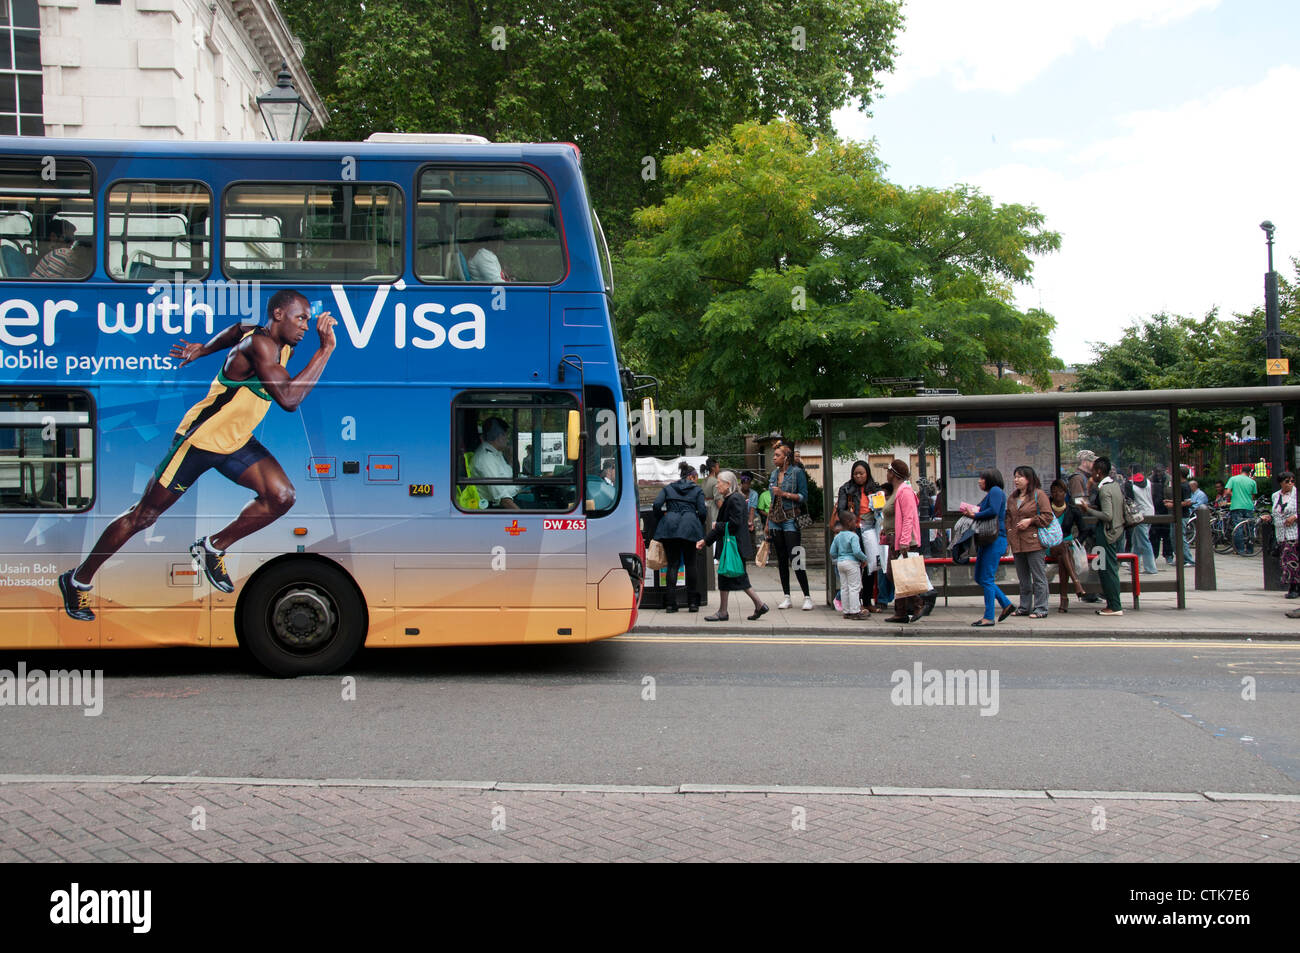 Narrow Way bus stop Hackney. Advert for Visa card featuring Usain Bolt, next to queue of people waiting for bus. Stock Photo